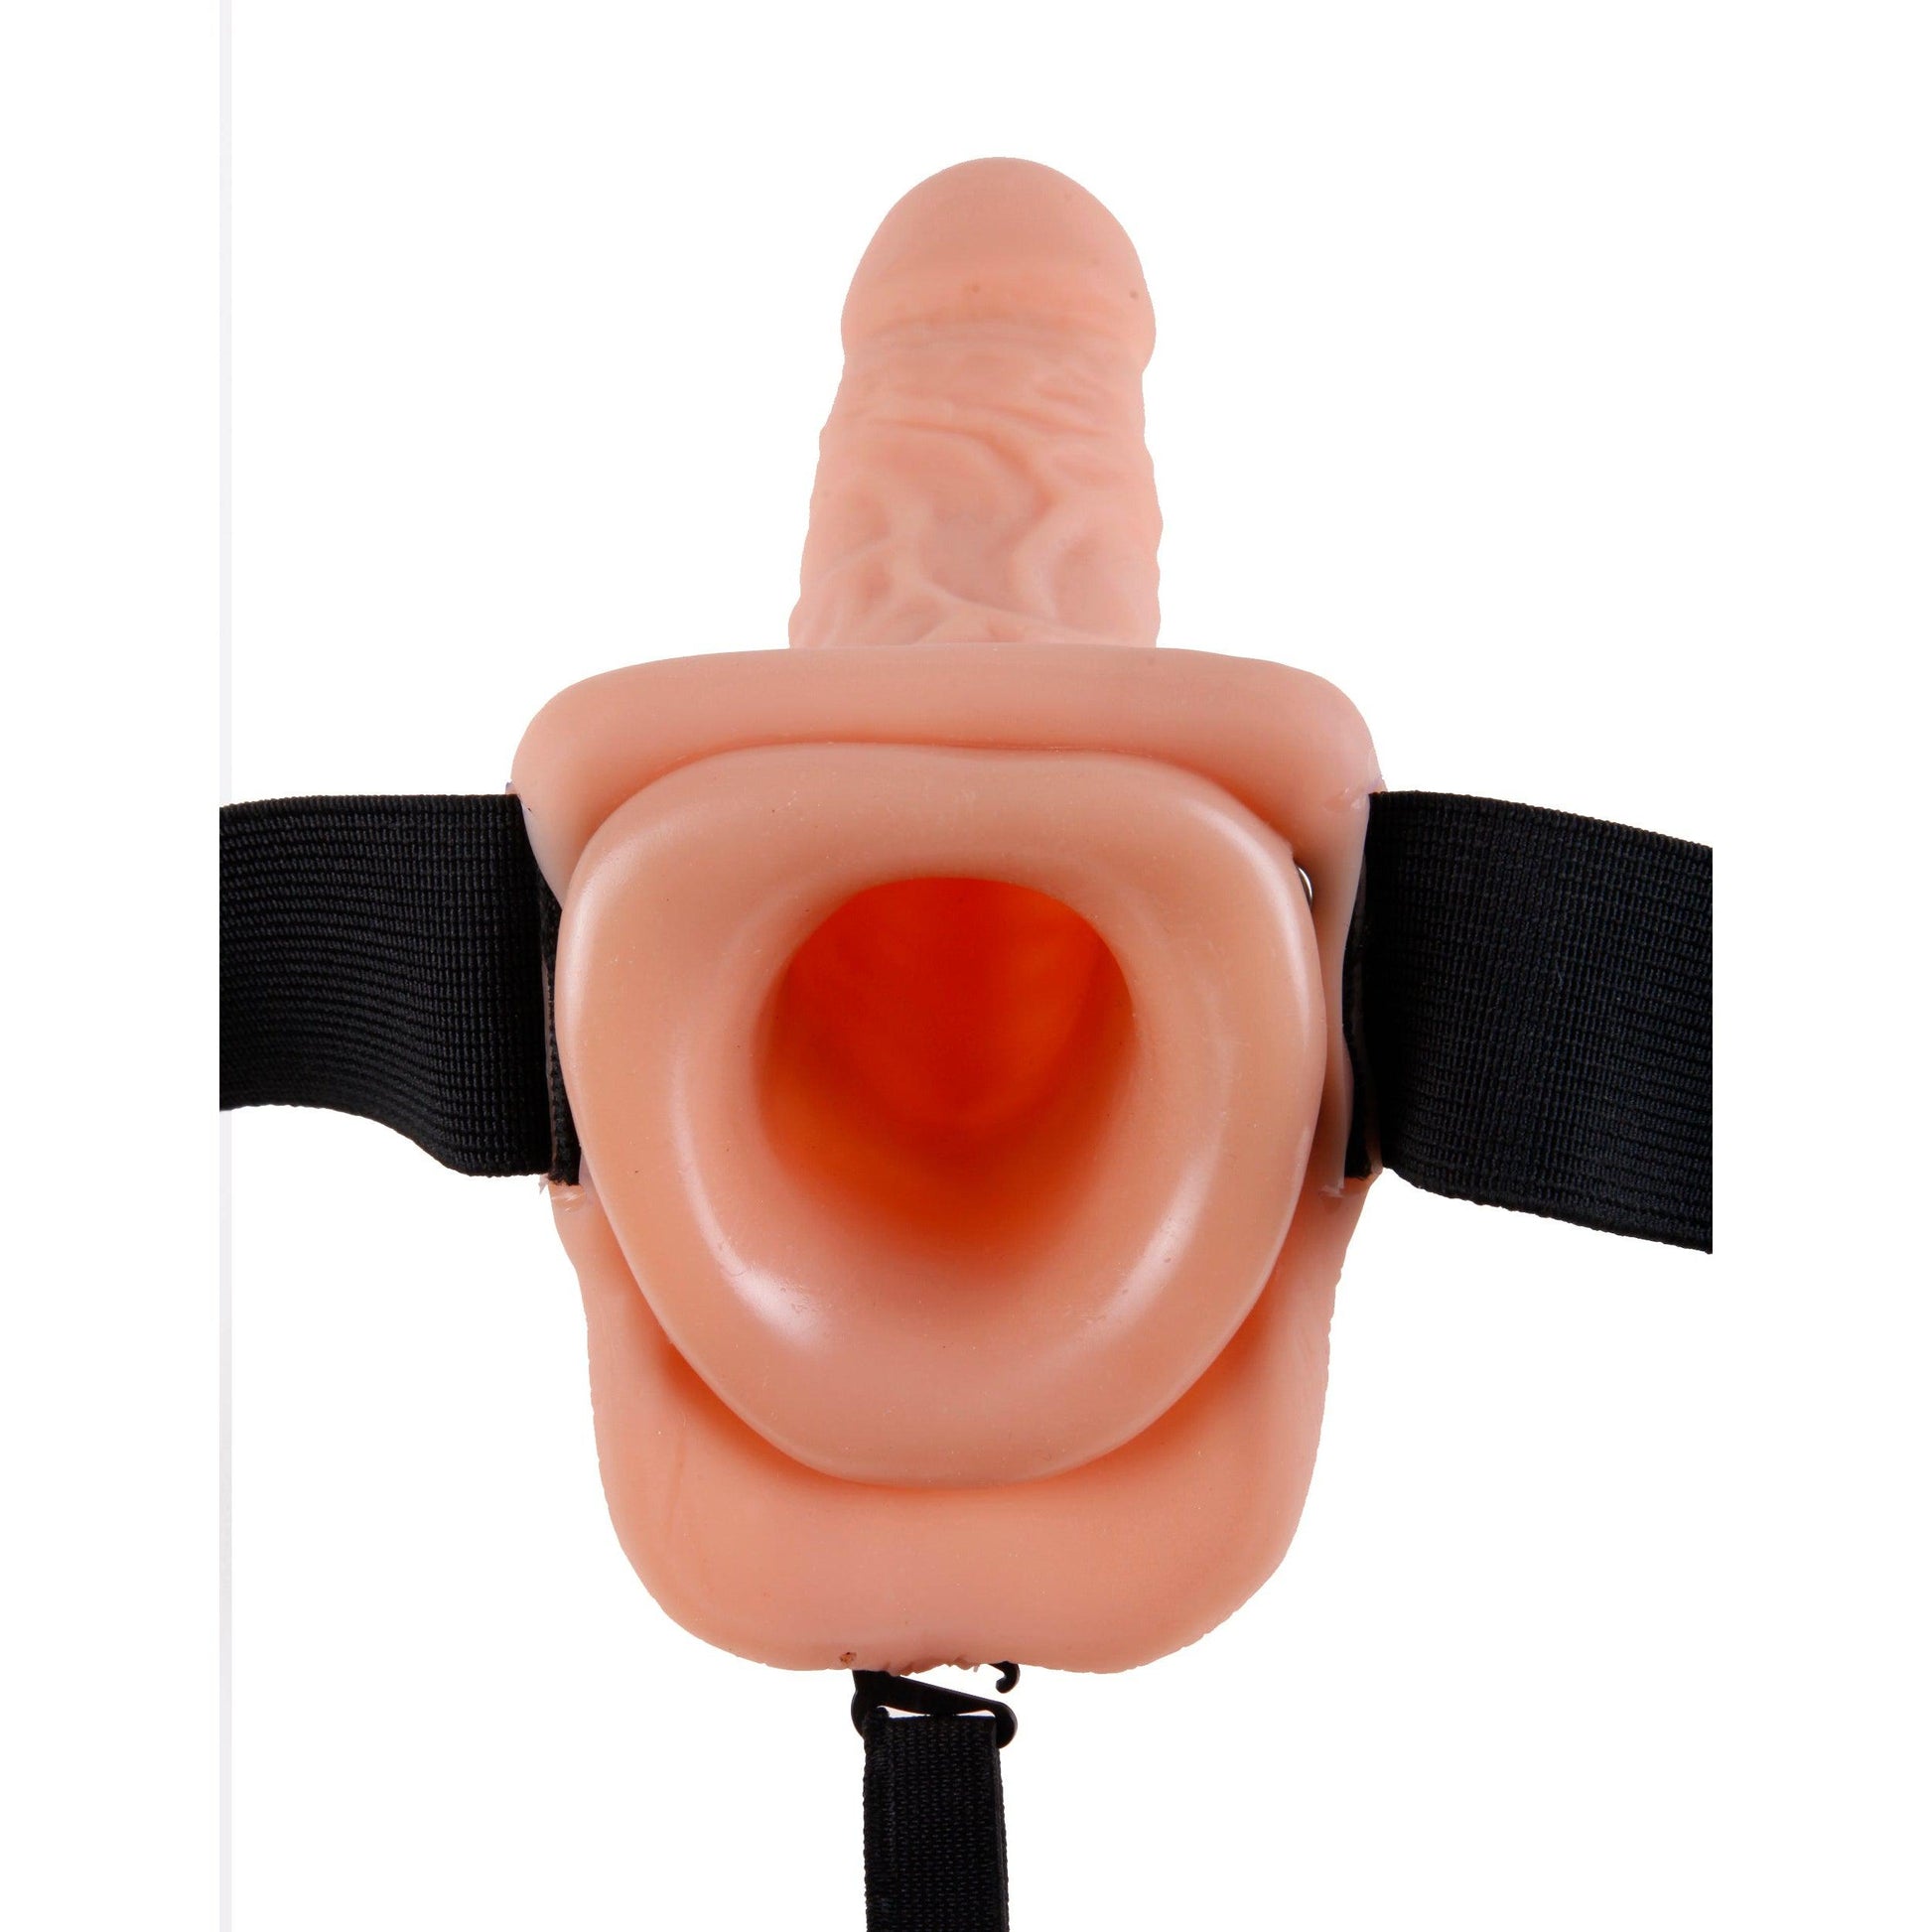 Fetish Fantasy Series 9 Inch Hollow Strap-on With  Balls - Flesh